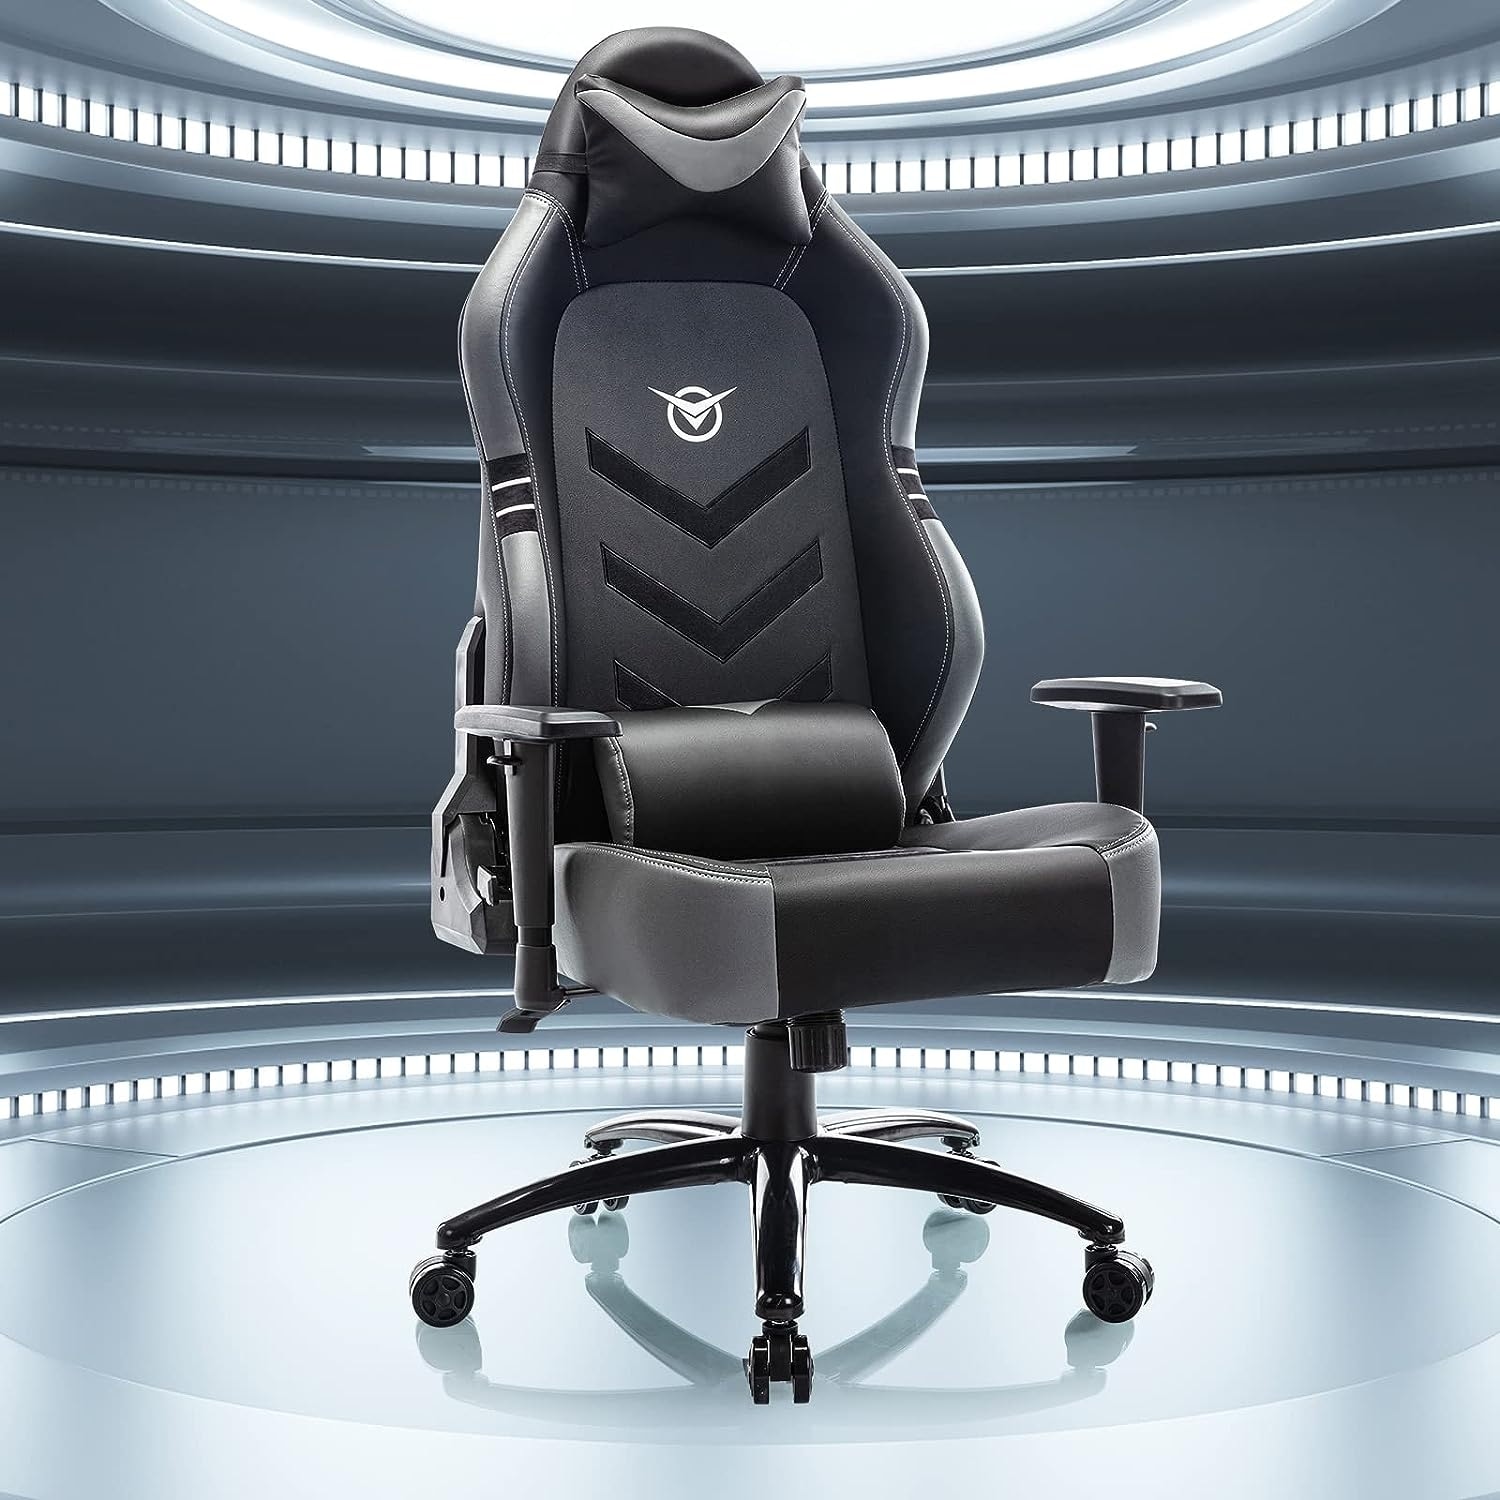 https://ak1.ostkcdn.com/images/products/is/images/direct/1375a545094f00d0158e042ae5928a7e9e6b4a63/Racing-Style-Computer-Gamer-Chair-with-Wide-Seat%2C-Reclining-Back%2C-Adjustable-Armrest-for-Adult-Teens.jpg